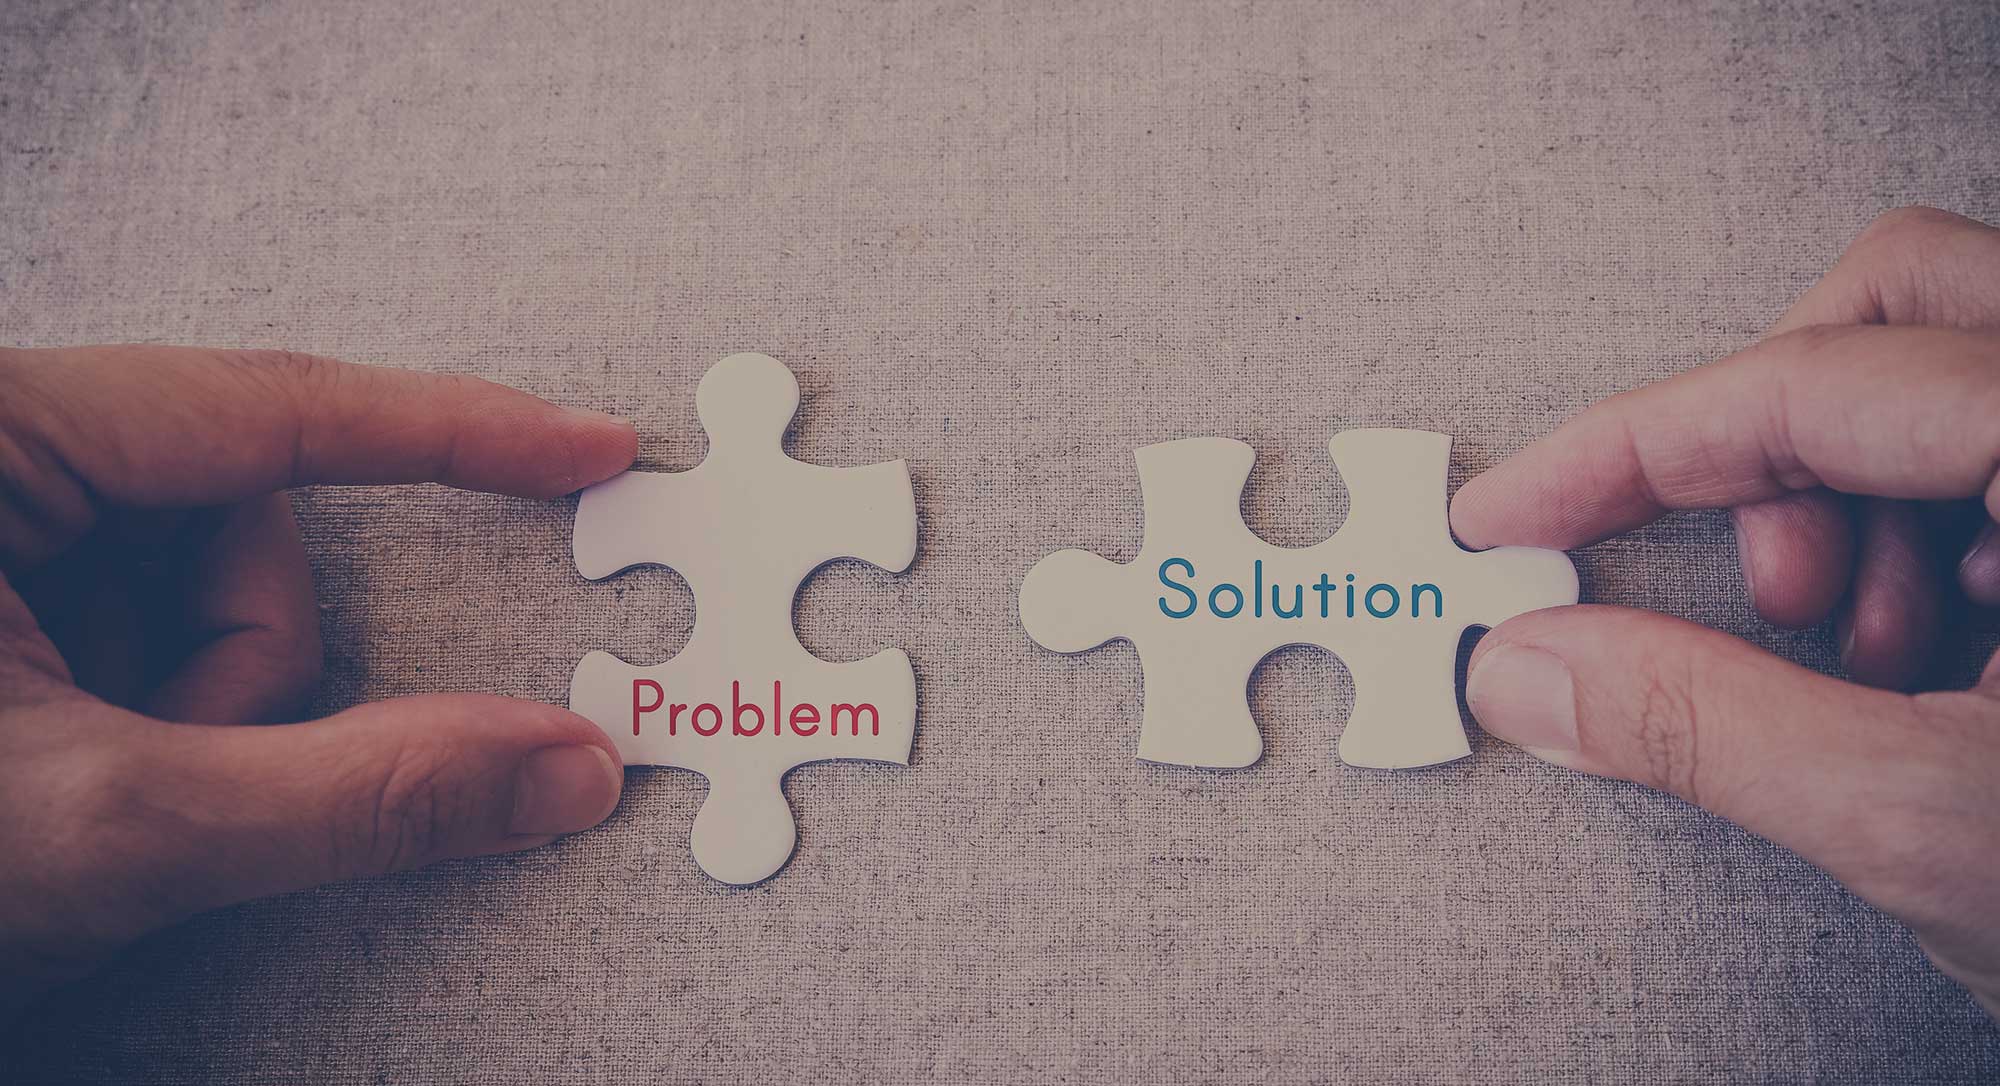 puzzle pieces of problem and solution being connected together